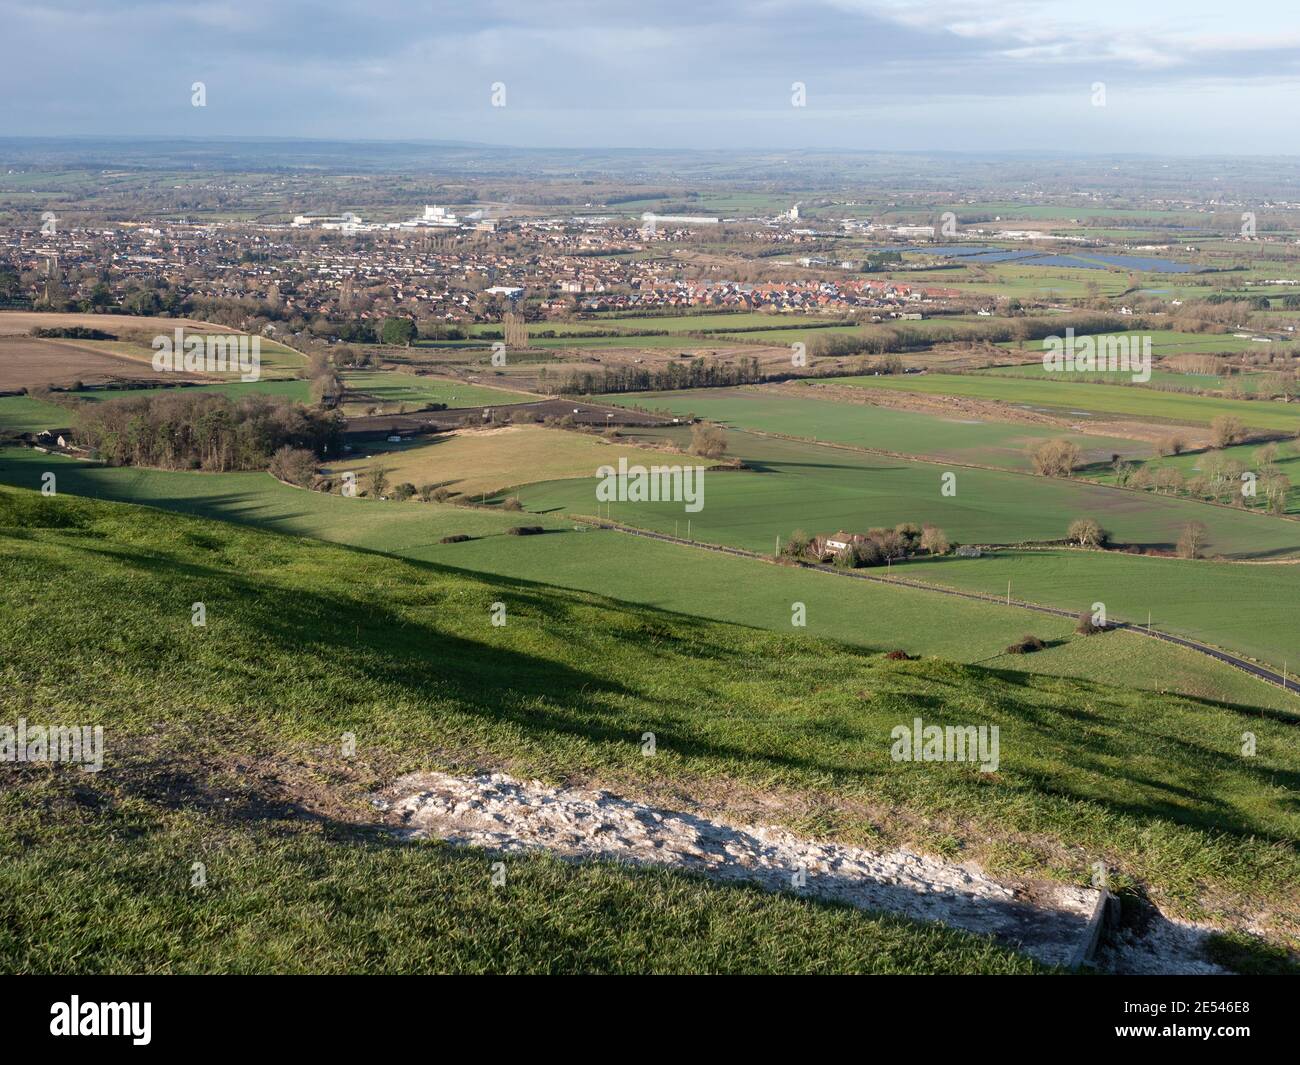 View of Westbury, Wiltshire from The White Horse on a winter's day. Stock Photo